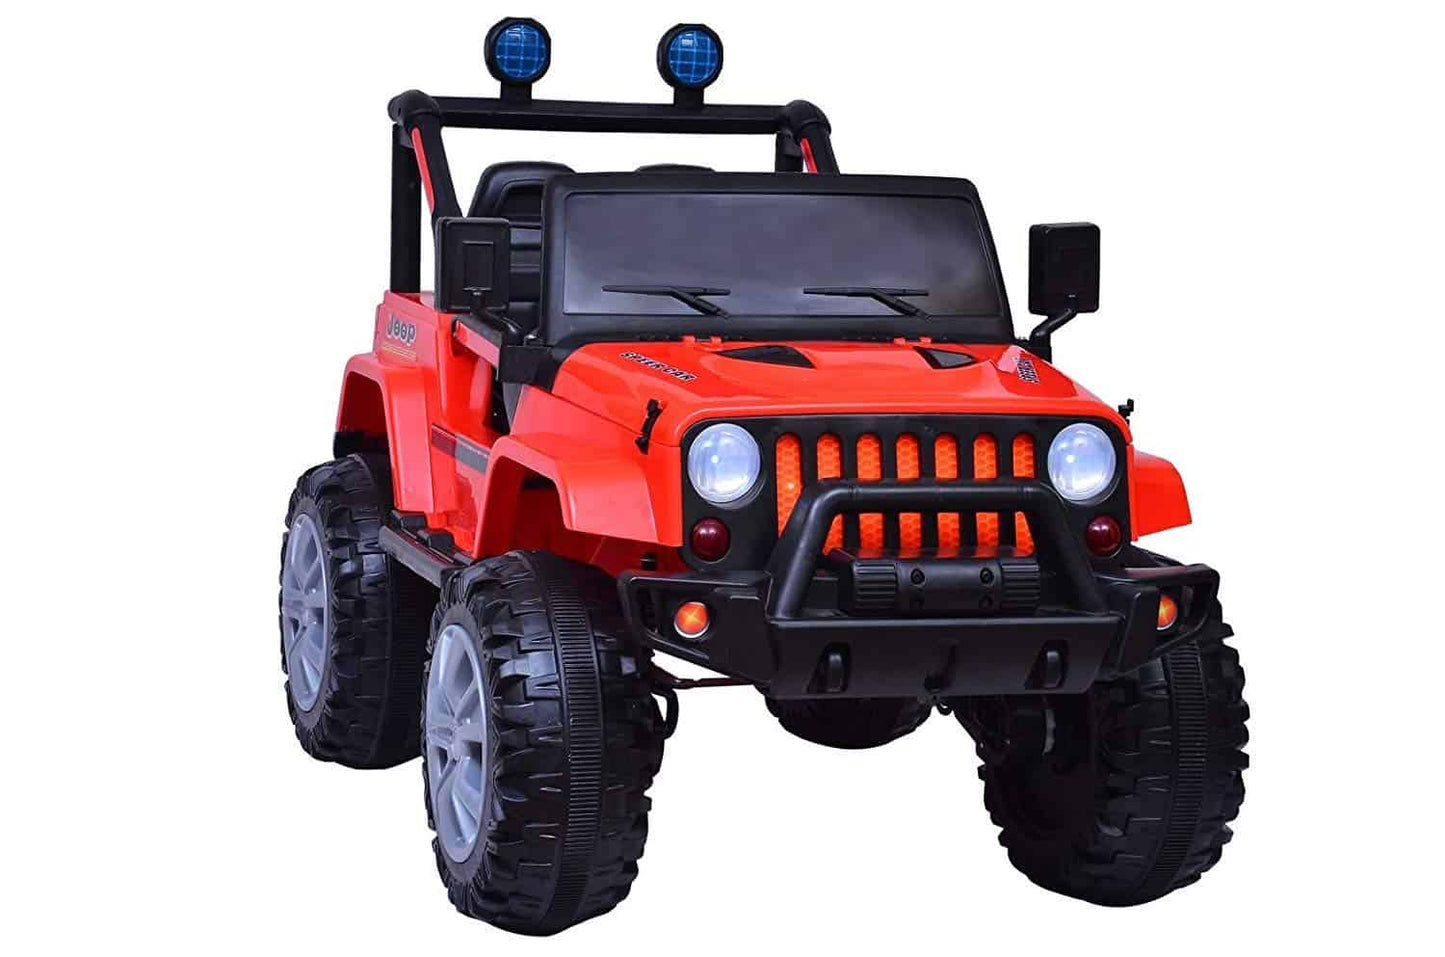 FLIPTOY™ 12 volt battery powered jeeps with Music, Lights and Remote Control, Red